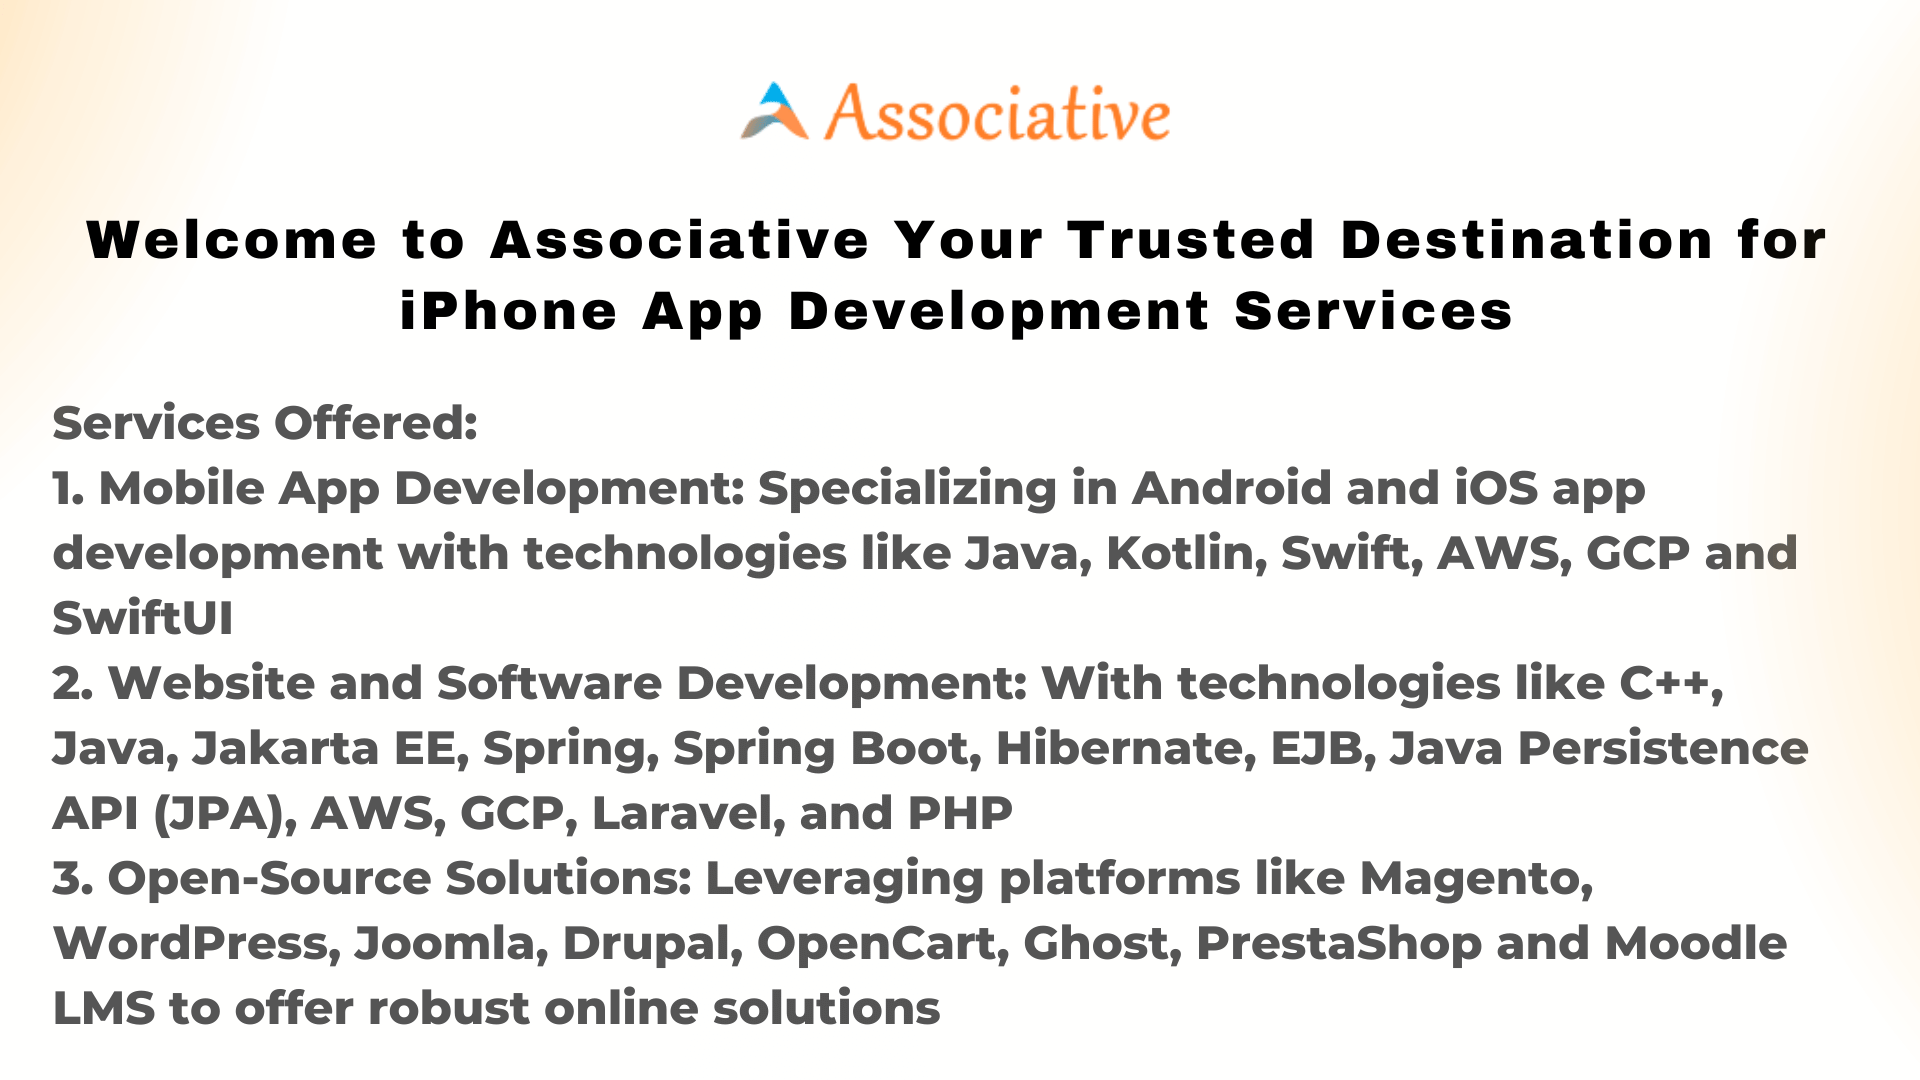 Welcome to Associative Your Trusted Destination for iPhone App Development Services